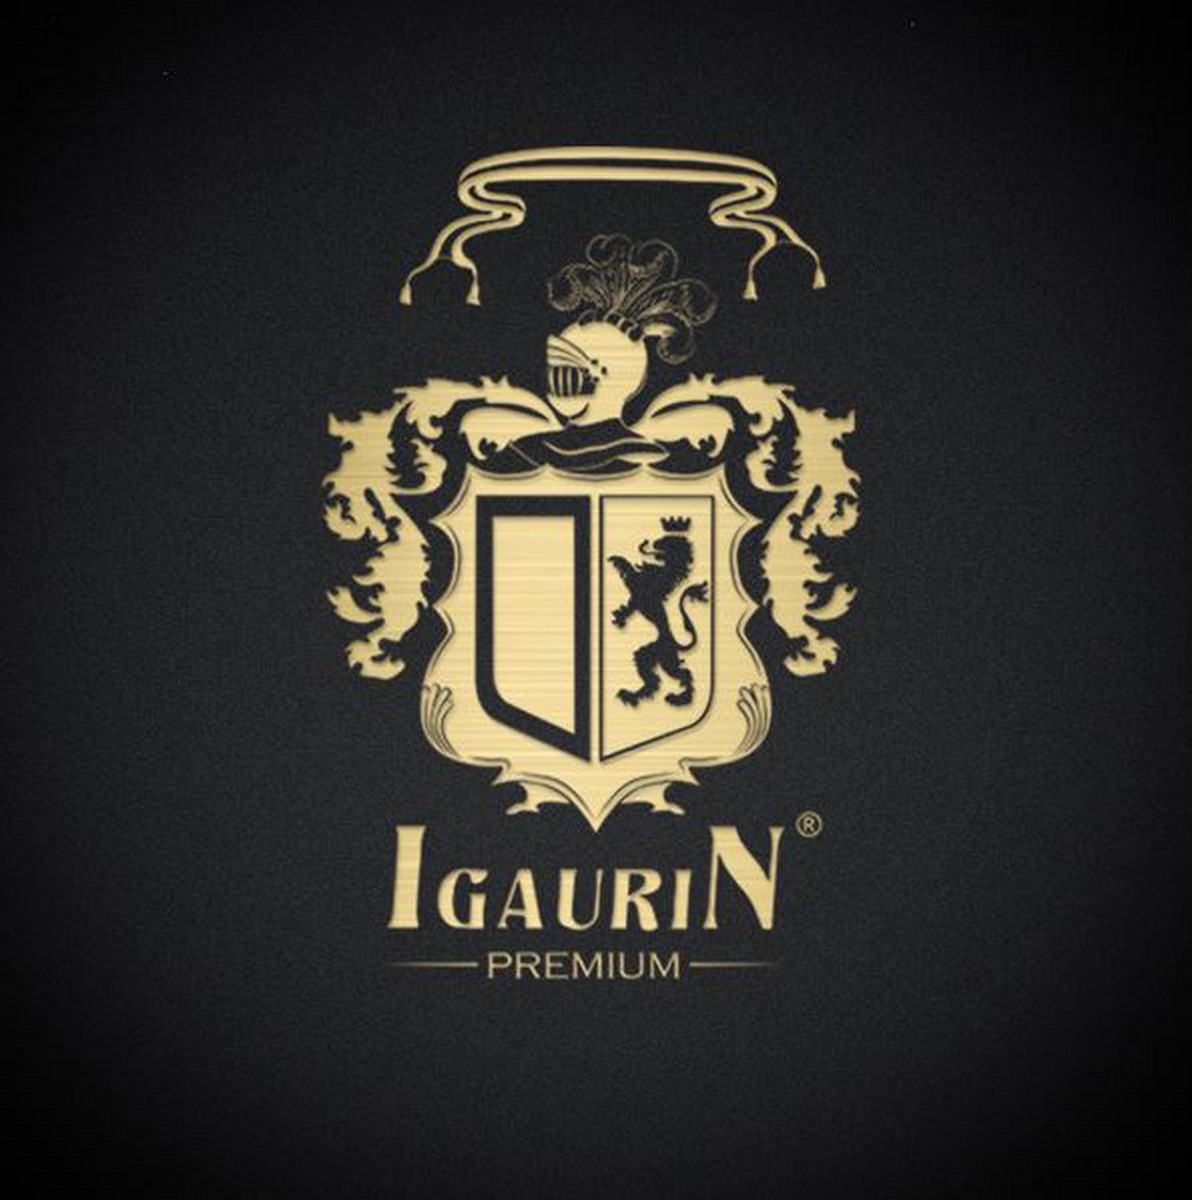 Igaurin oil Image